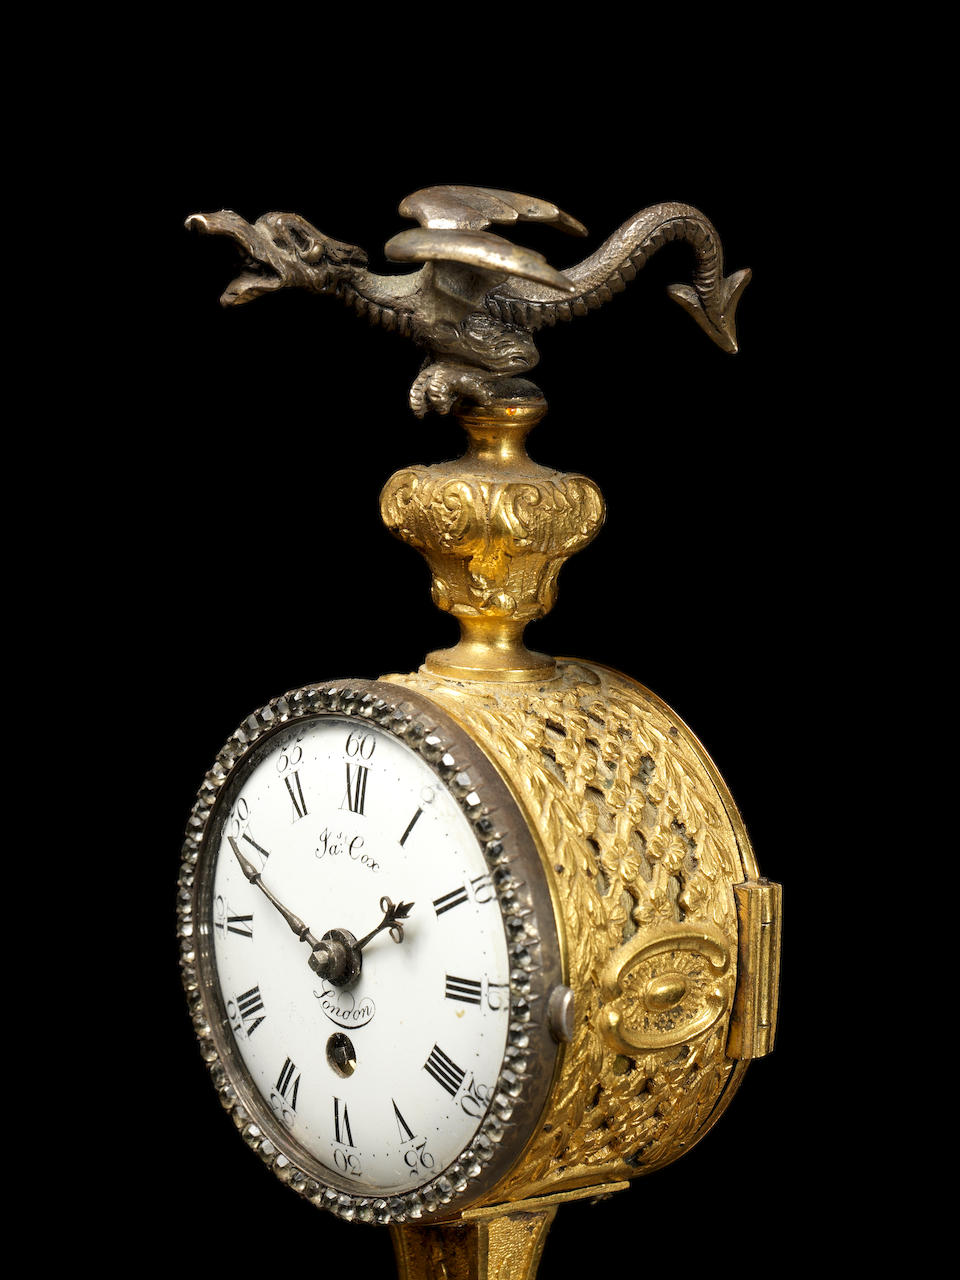 An exceptional mid 18th century agate-panelled and silver-mounted musical ormolu table clock with moonphase indication. Sold with the original key, signed and dated key, James Cox, London, 1766. James Cox, London 2